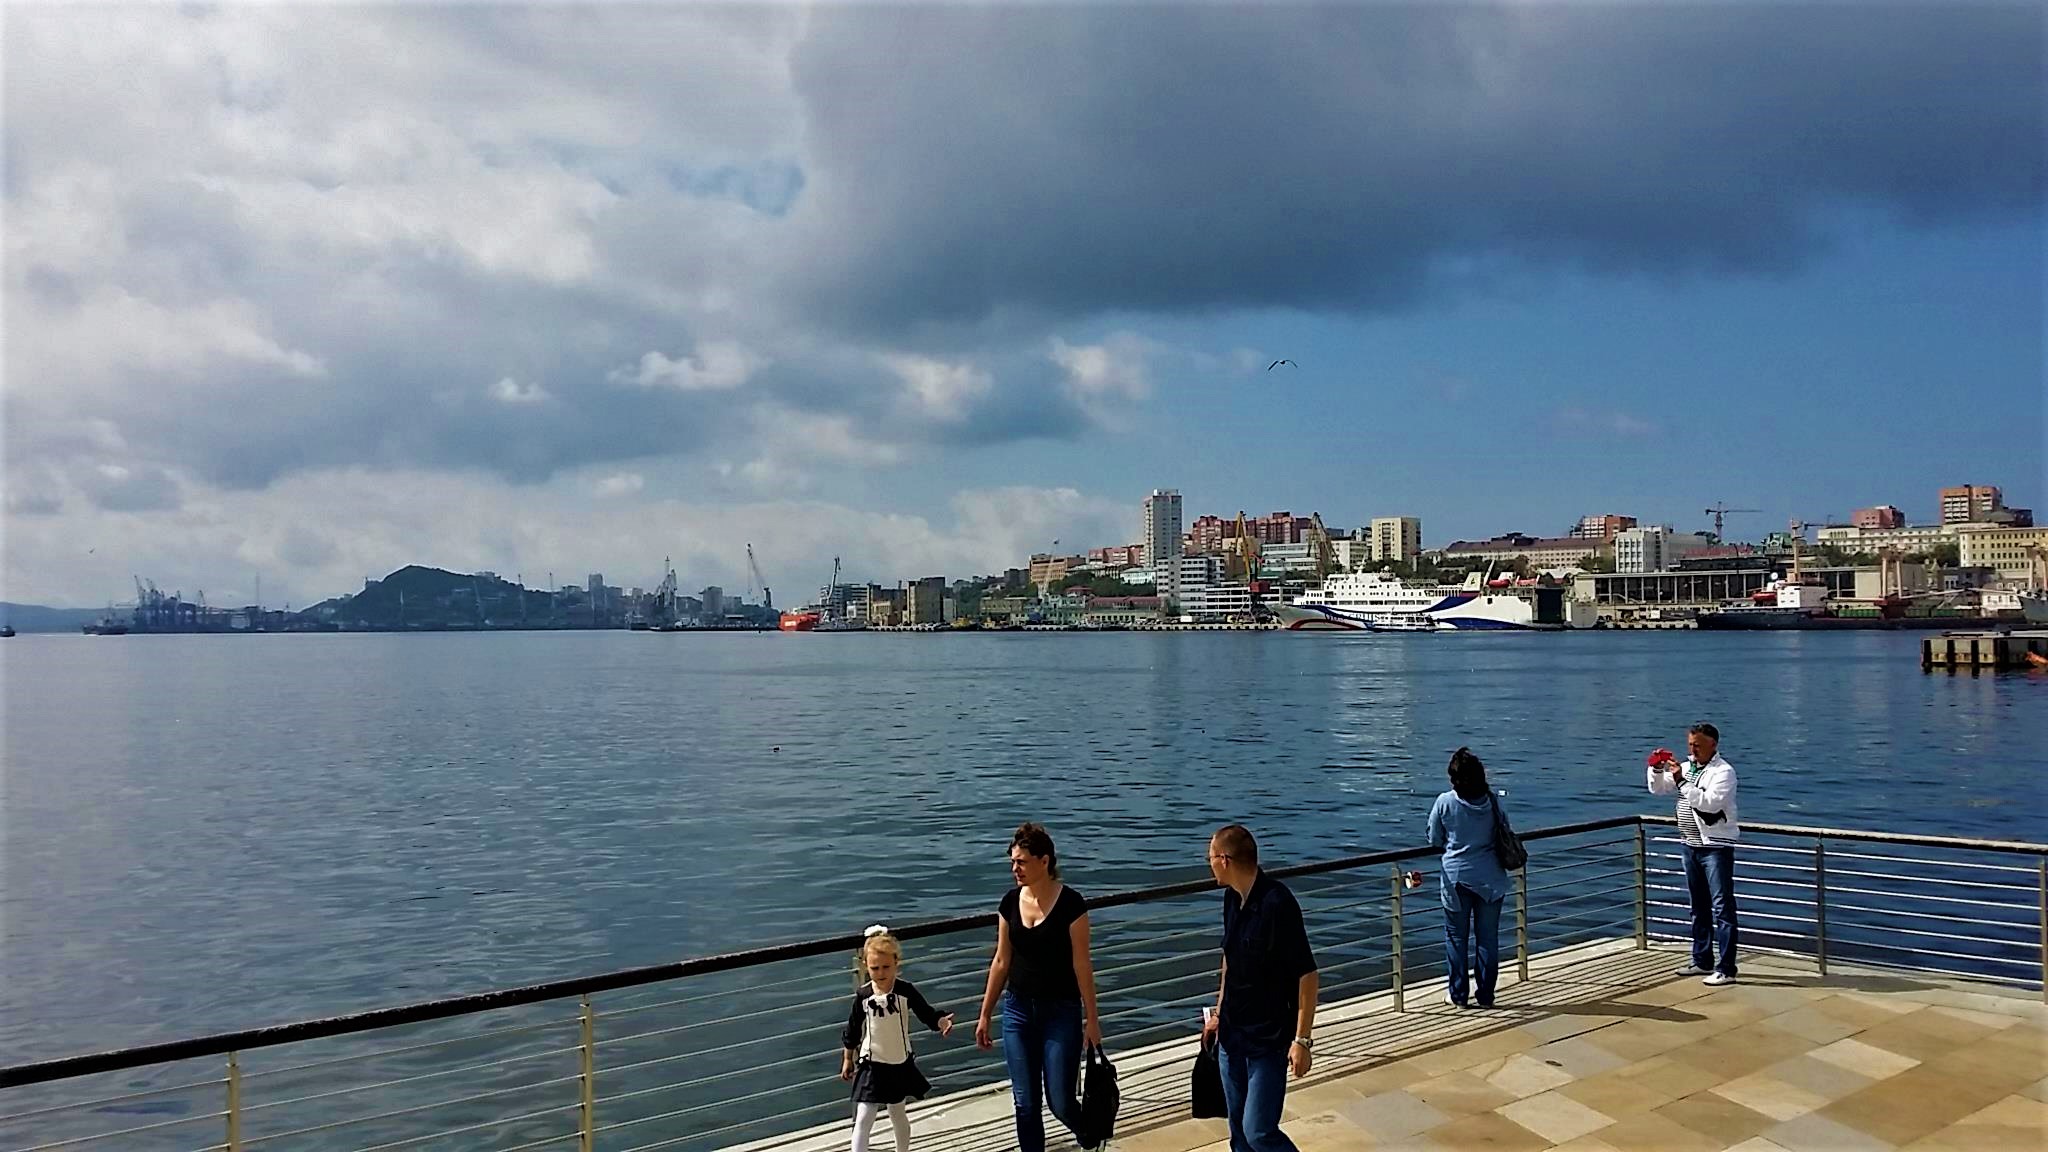 Vladivostok: Russia’s Underrated “City by the Bay”